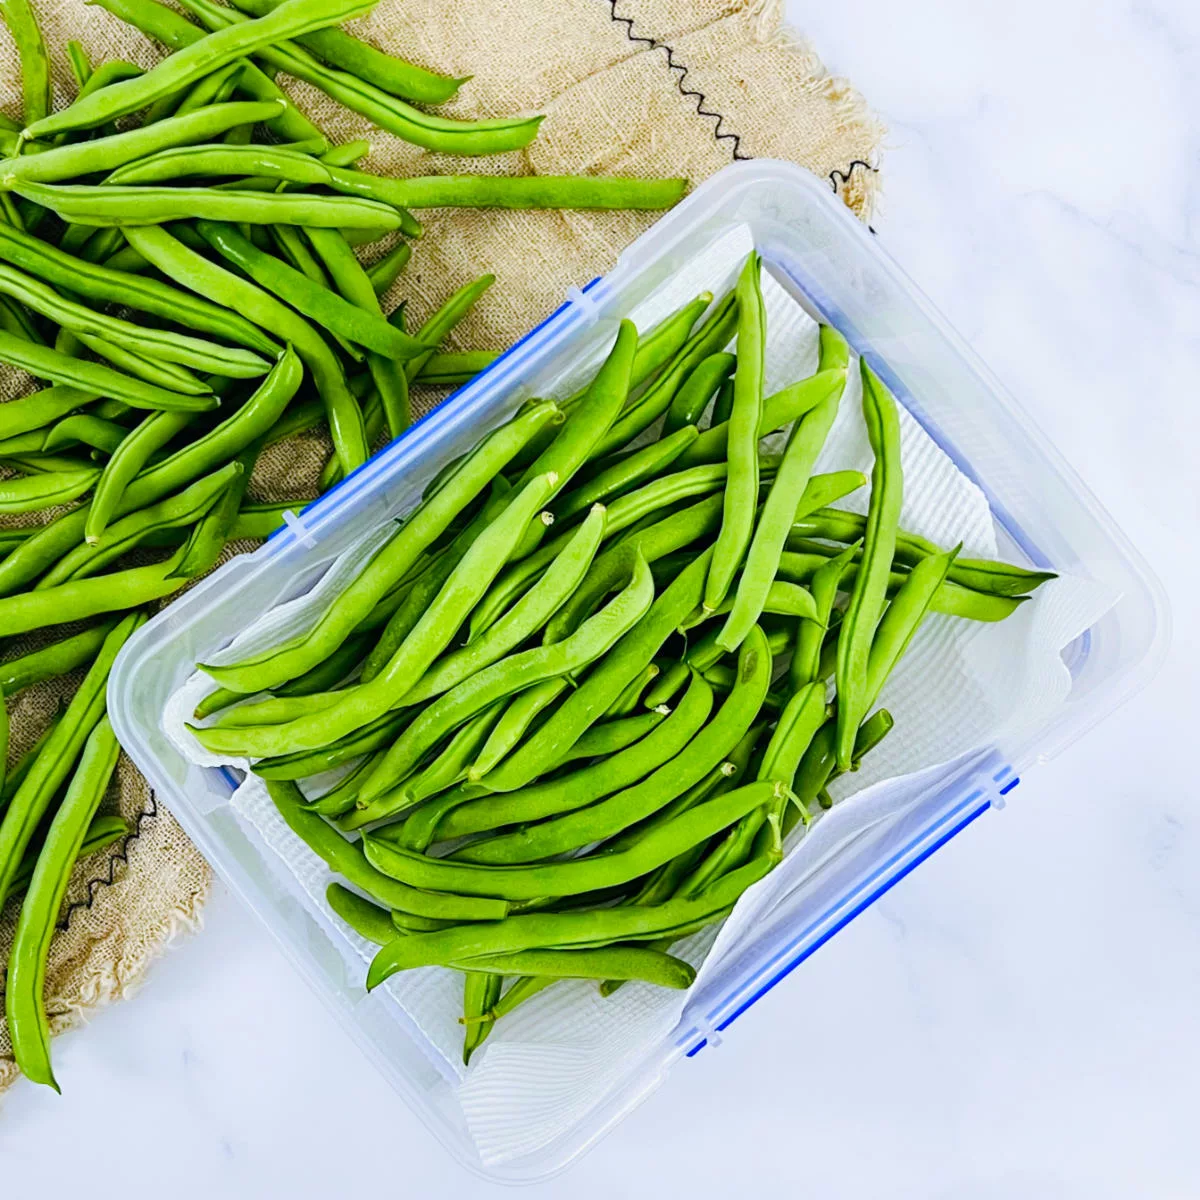 Storing green beans in the refrigerator.